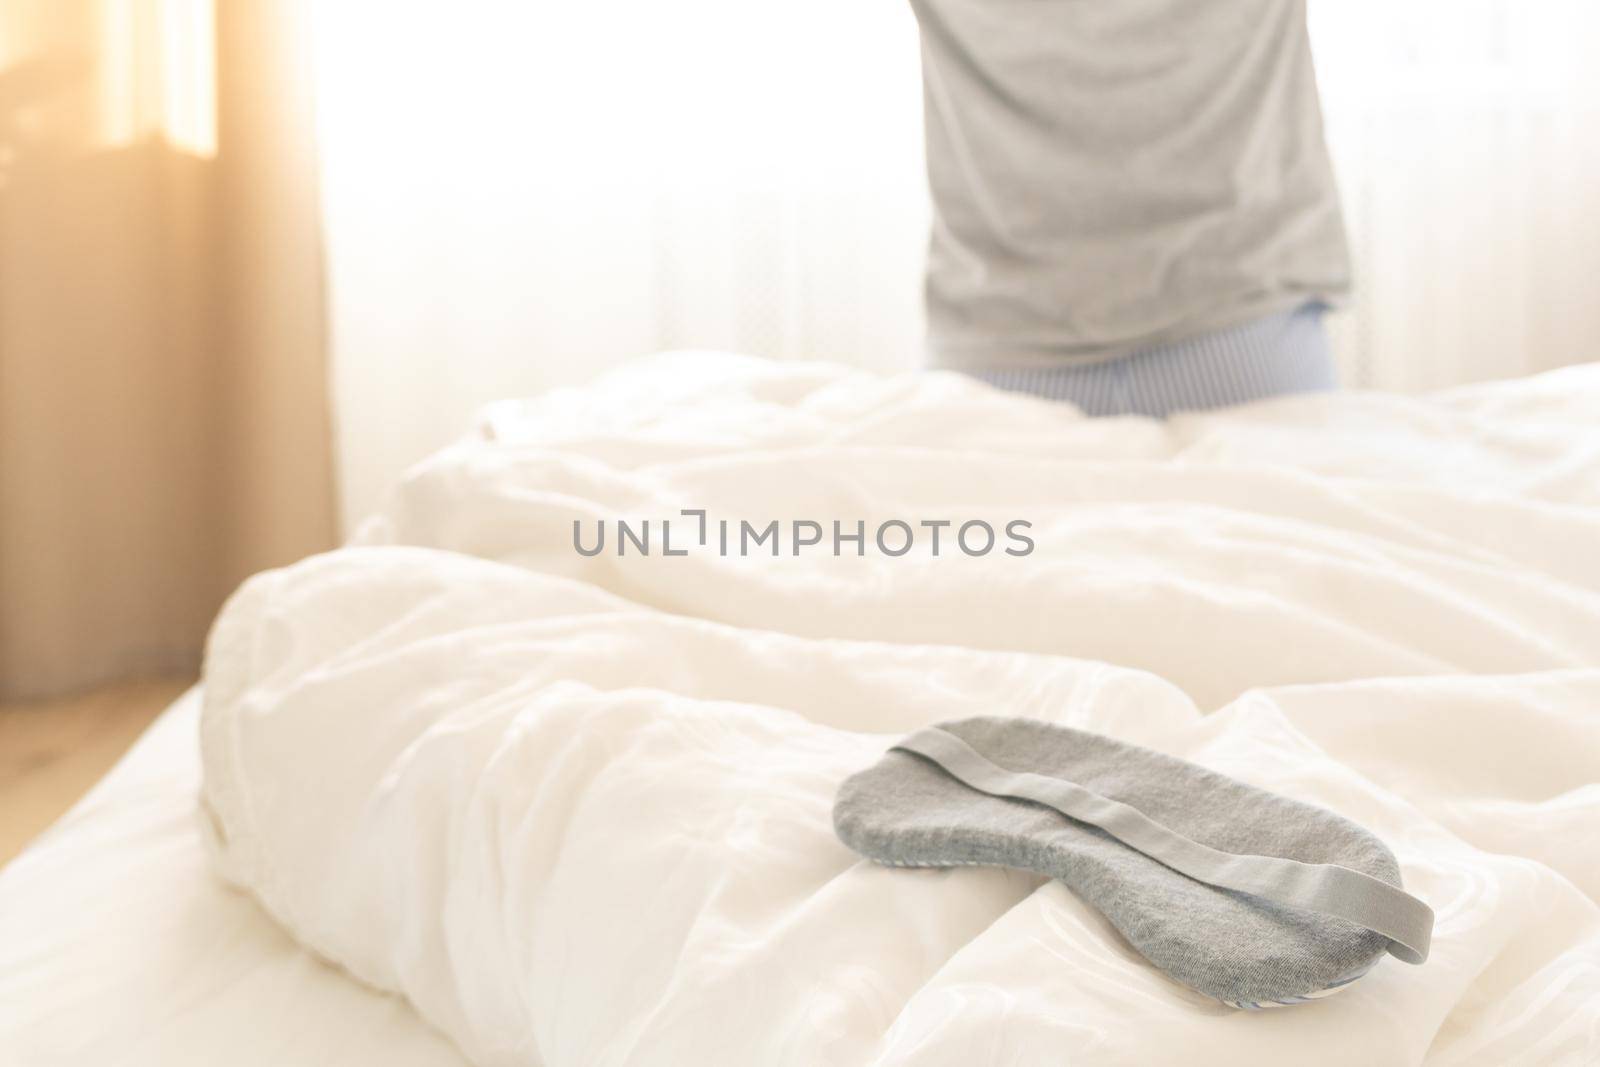 Sleeping mask on a bed with stretching woman in the background by Mariakray